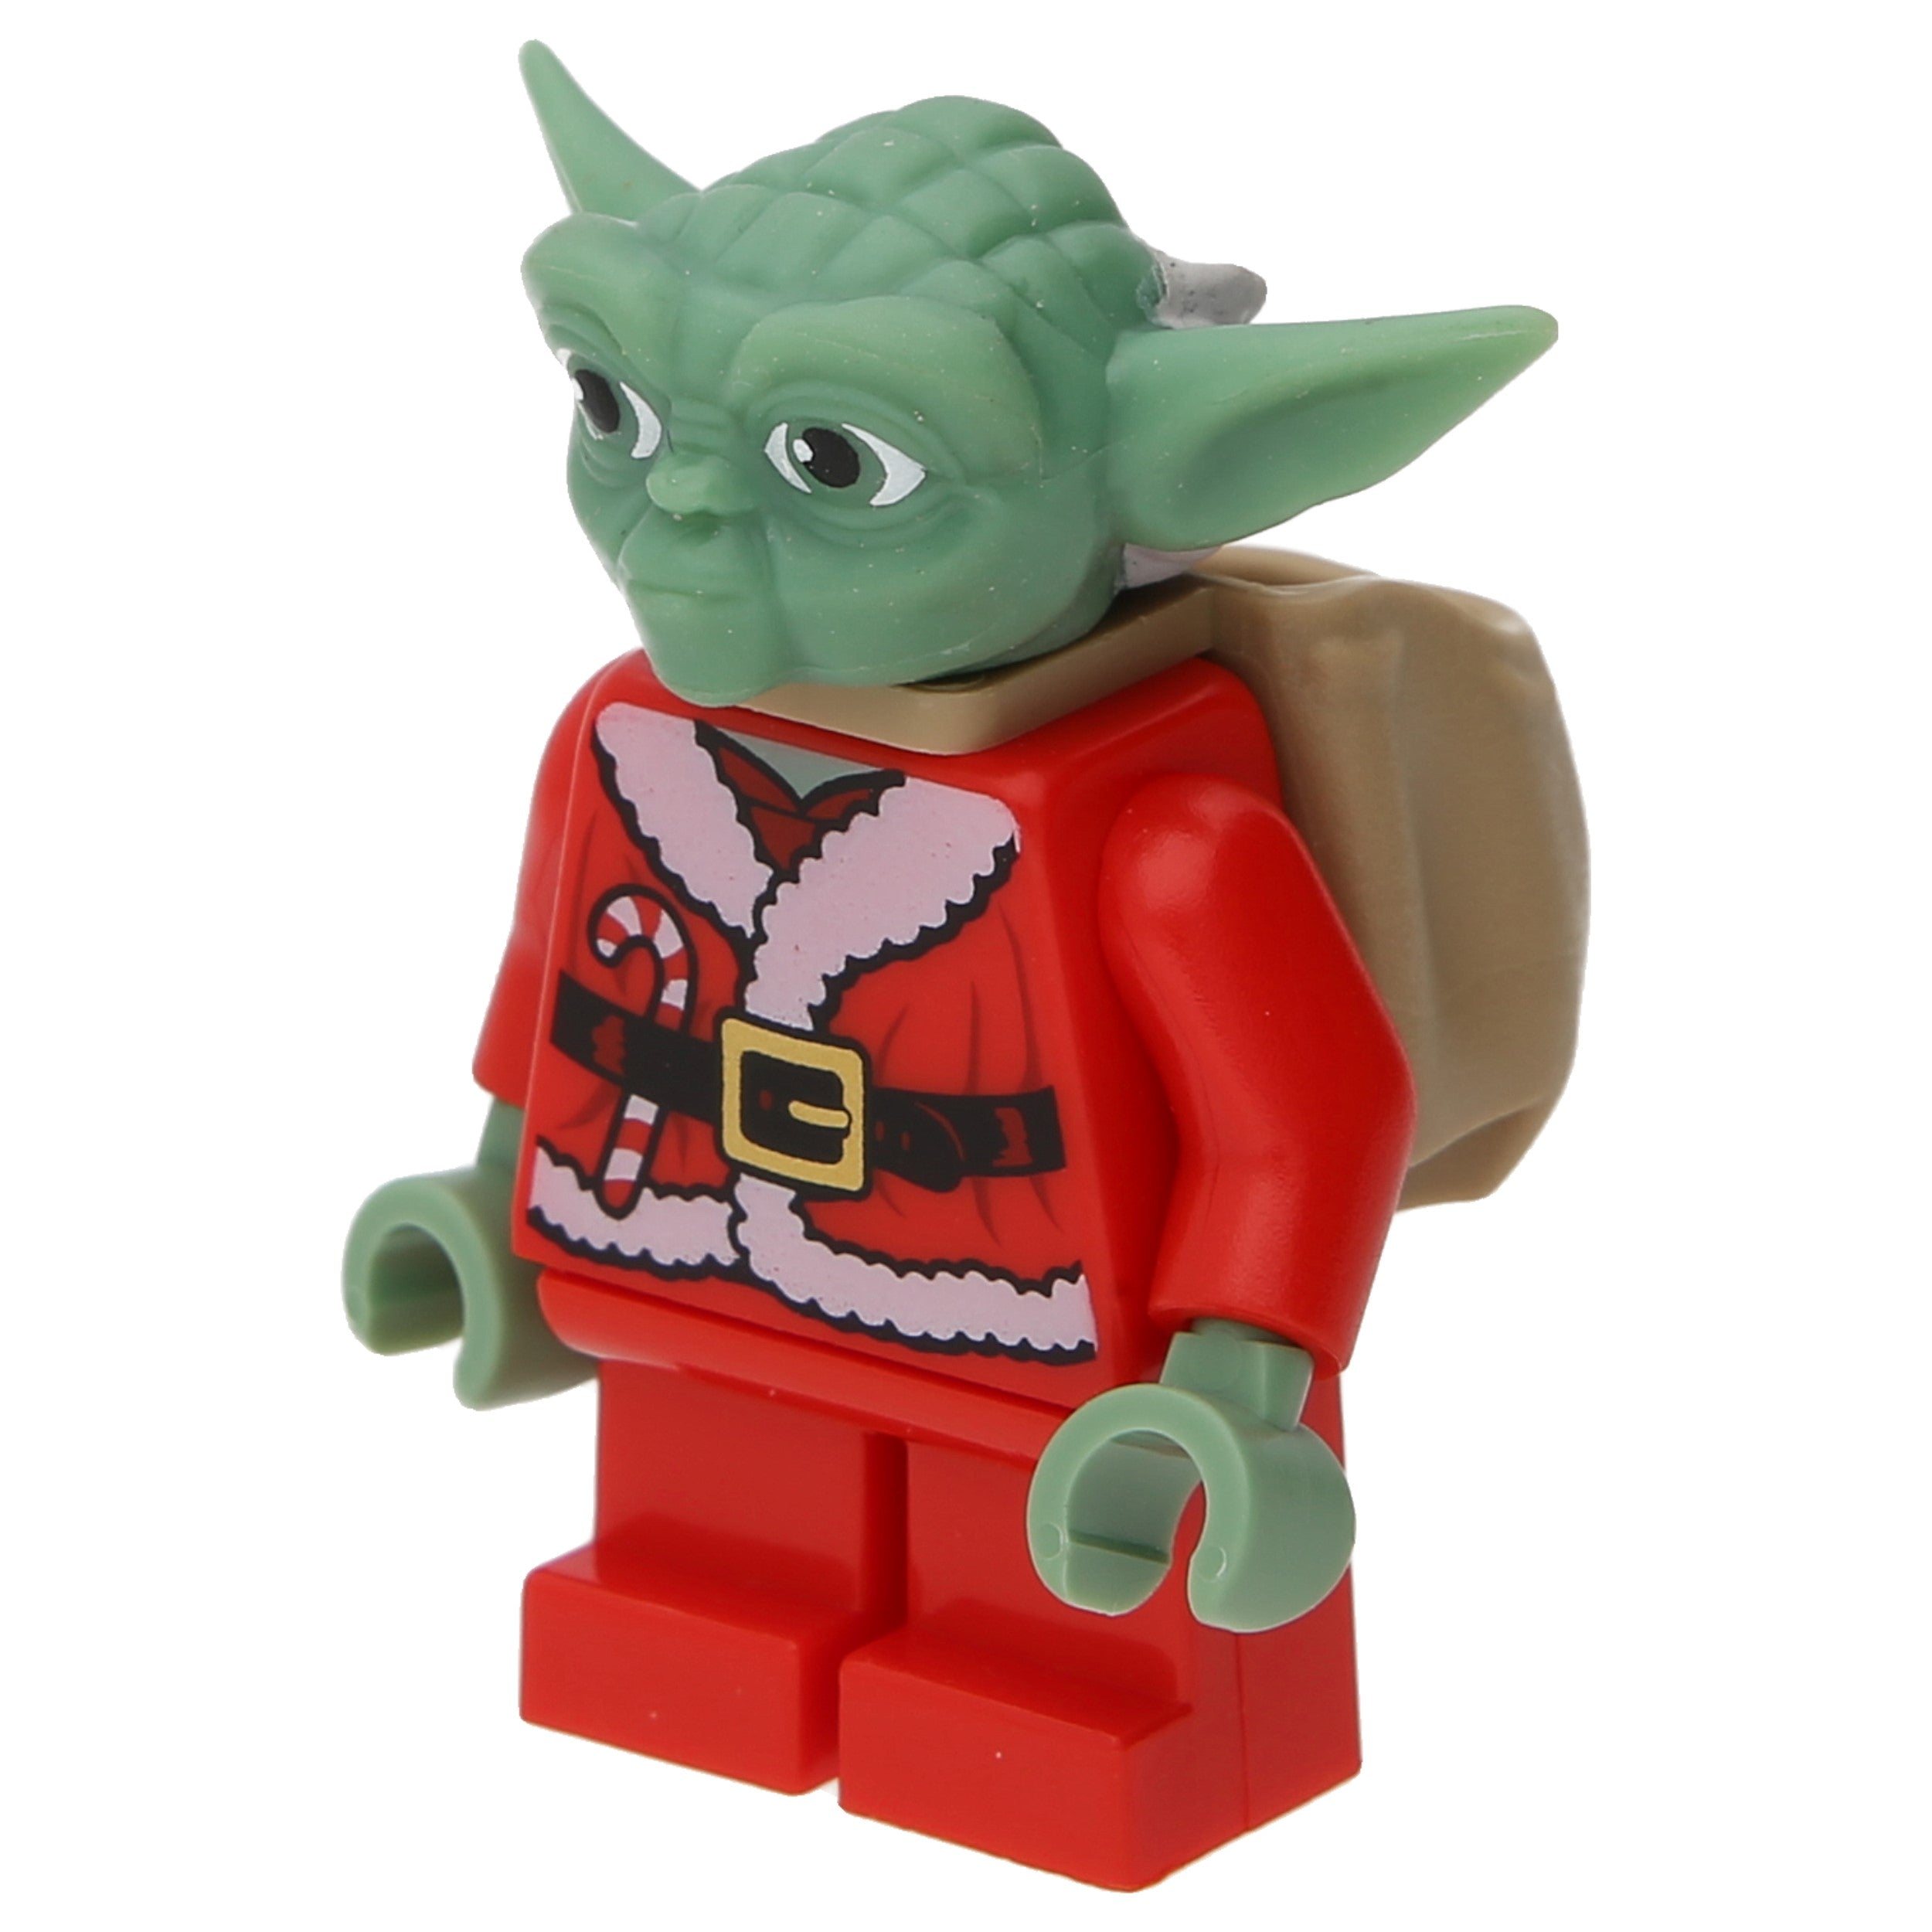 LEGO Star Wars minifigures - Yoda in Christmas outfit with backpack of presents 